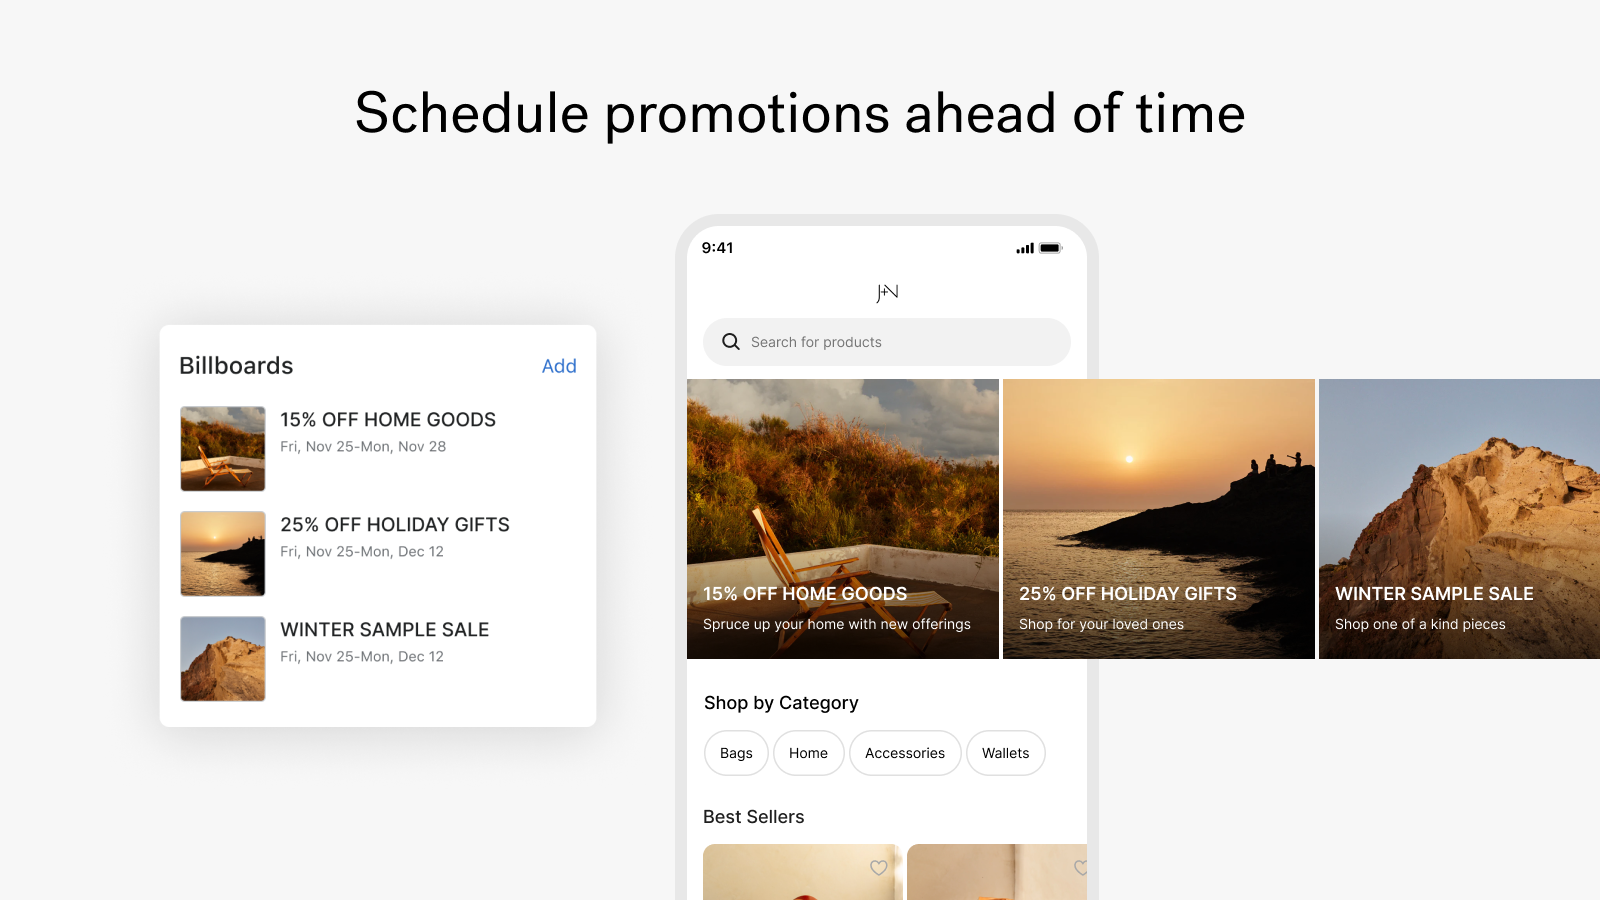 Schedule promotions ahead of time